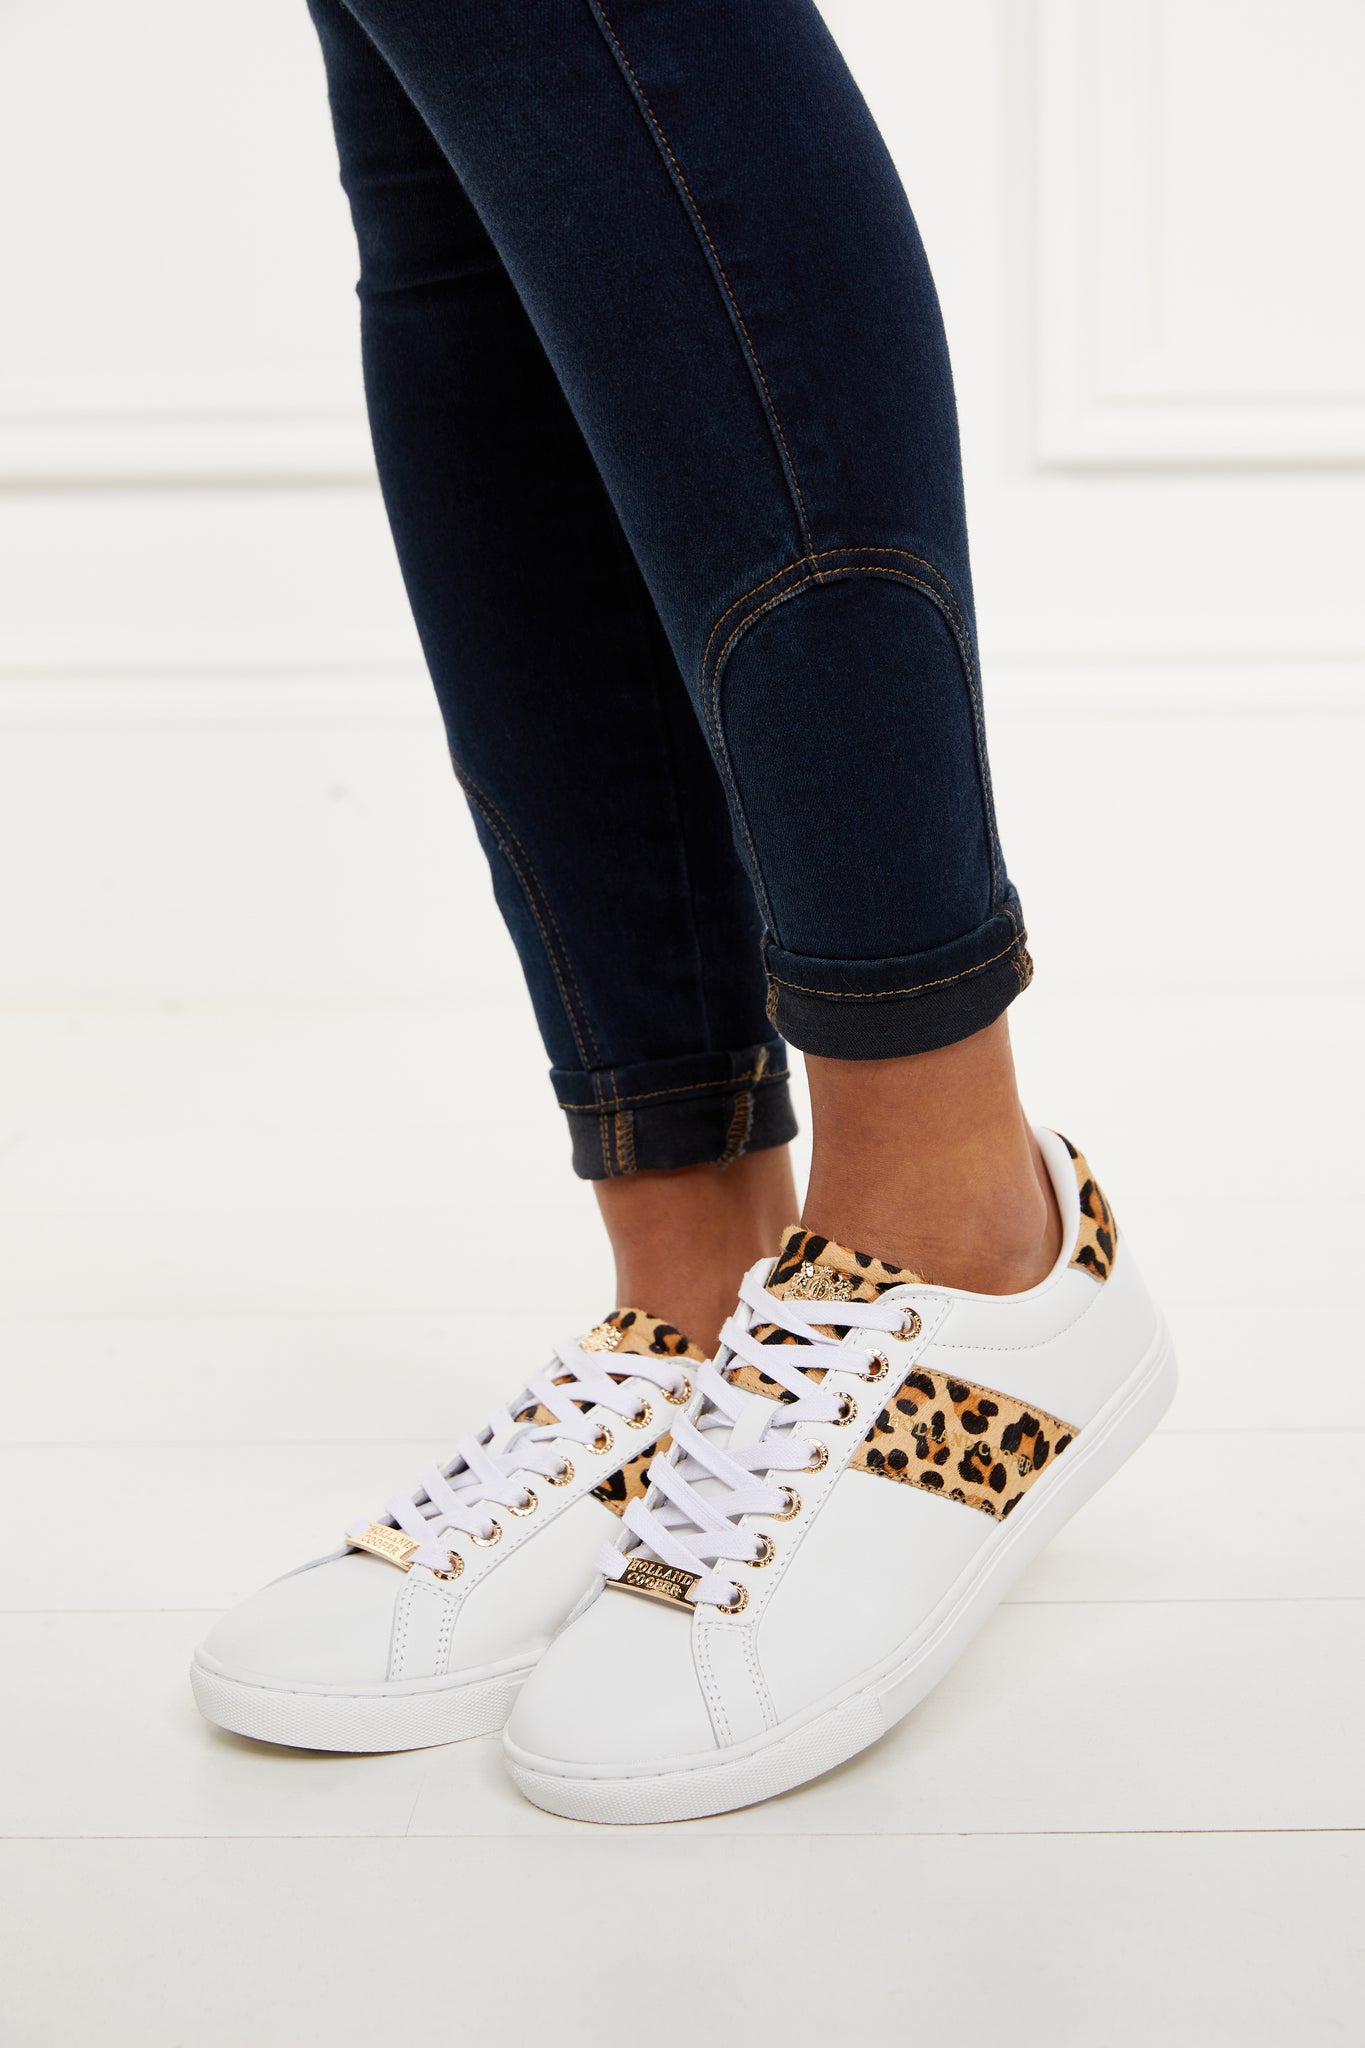 white leather trainers with white laces detailed with a diagonal stripe of leopard print on the side with gold foil branding and a leopard print heel and tongue with gold hardware. Worn with rolled up denim skinny jeans.